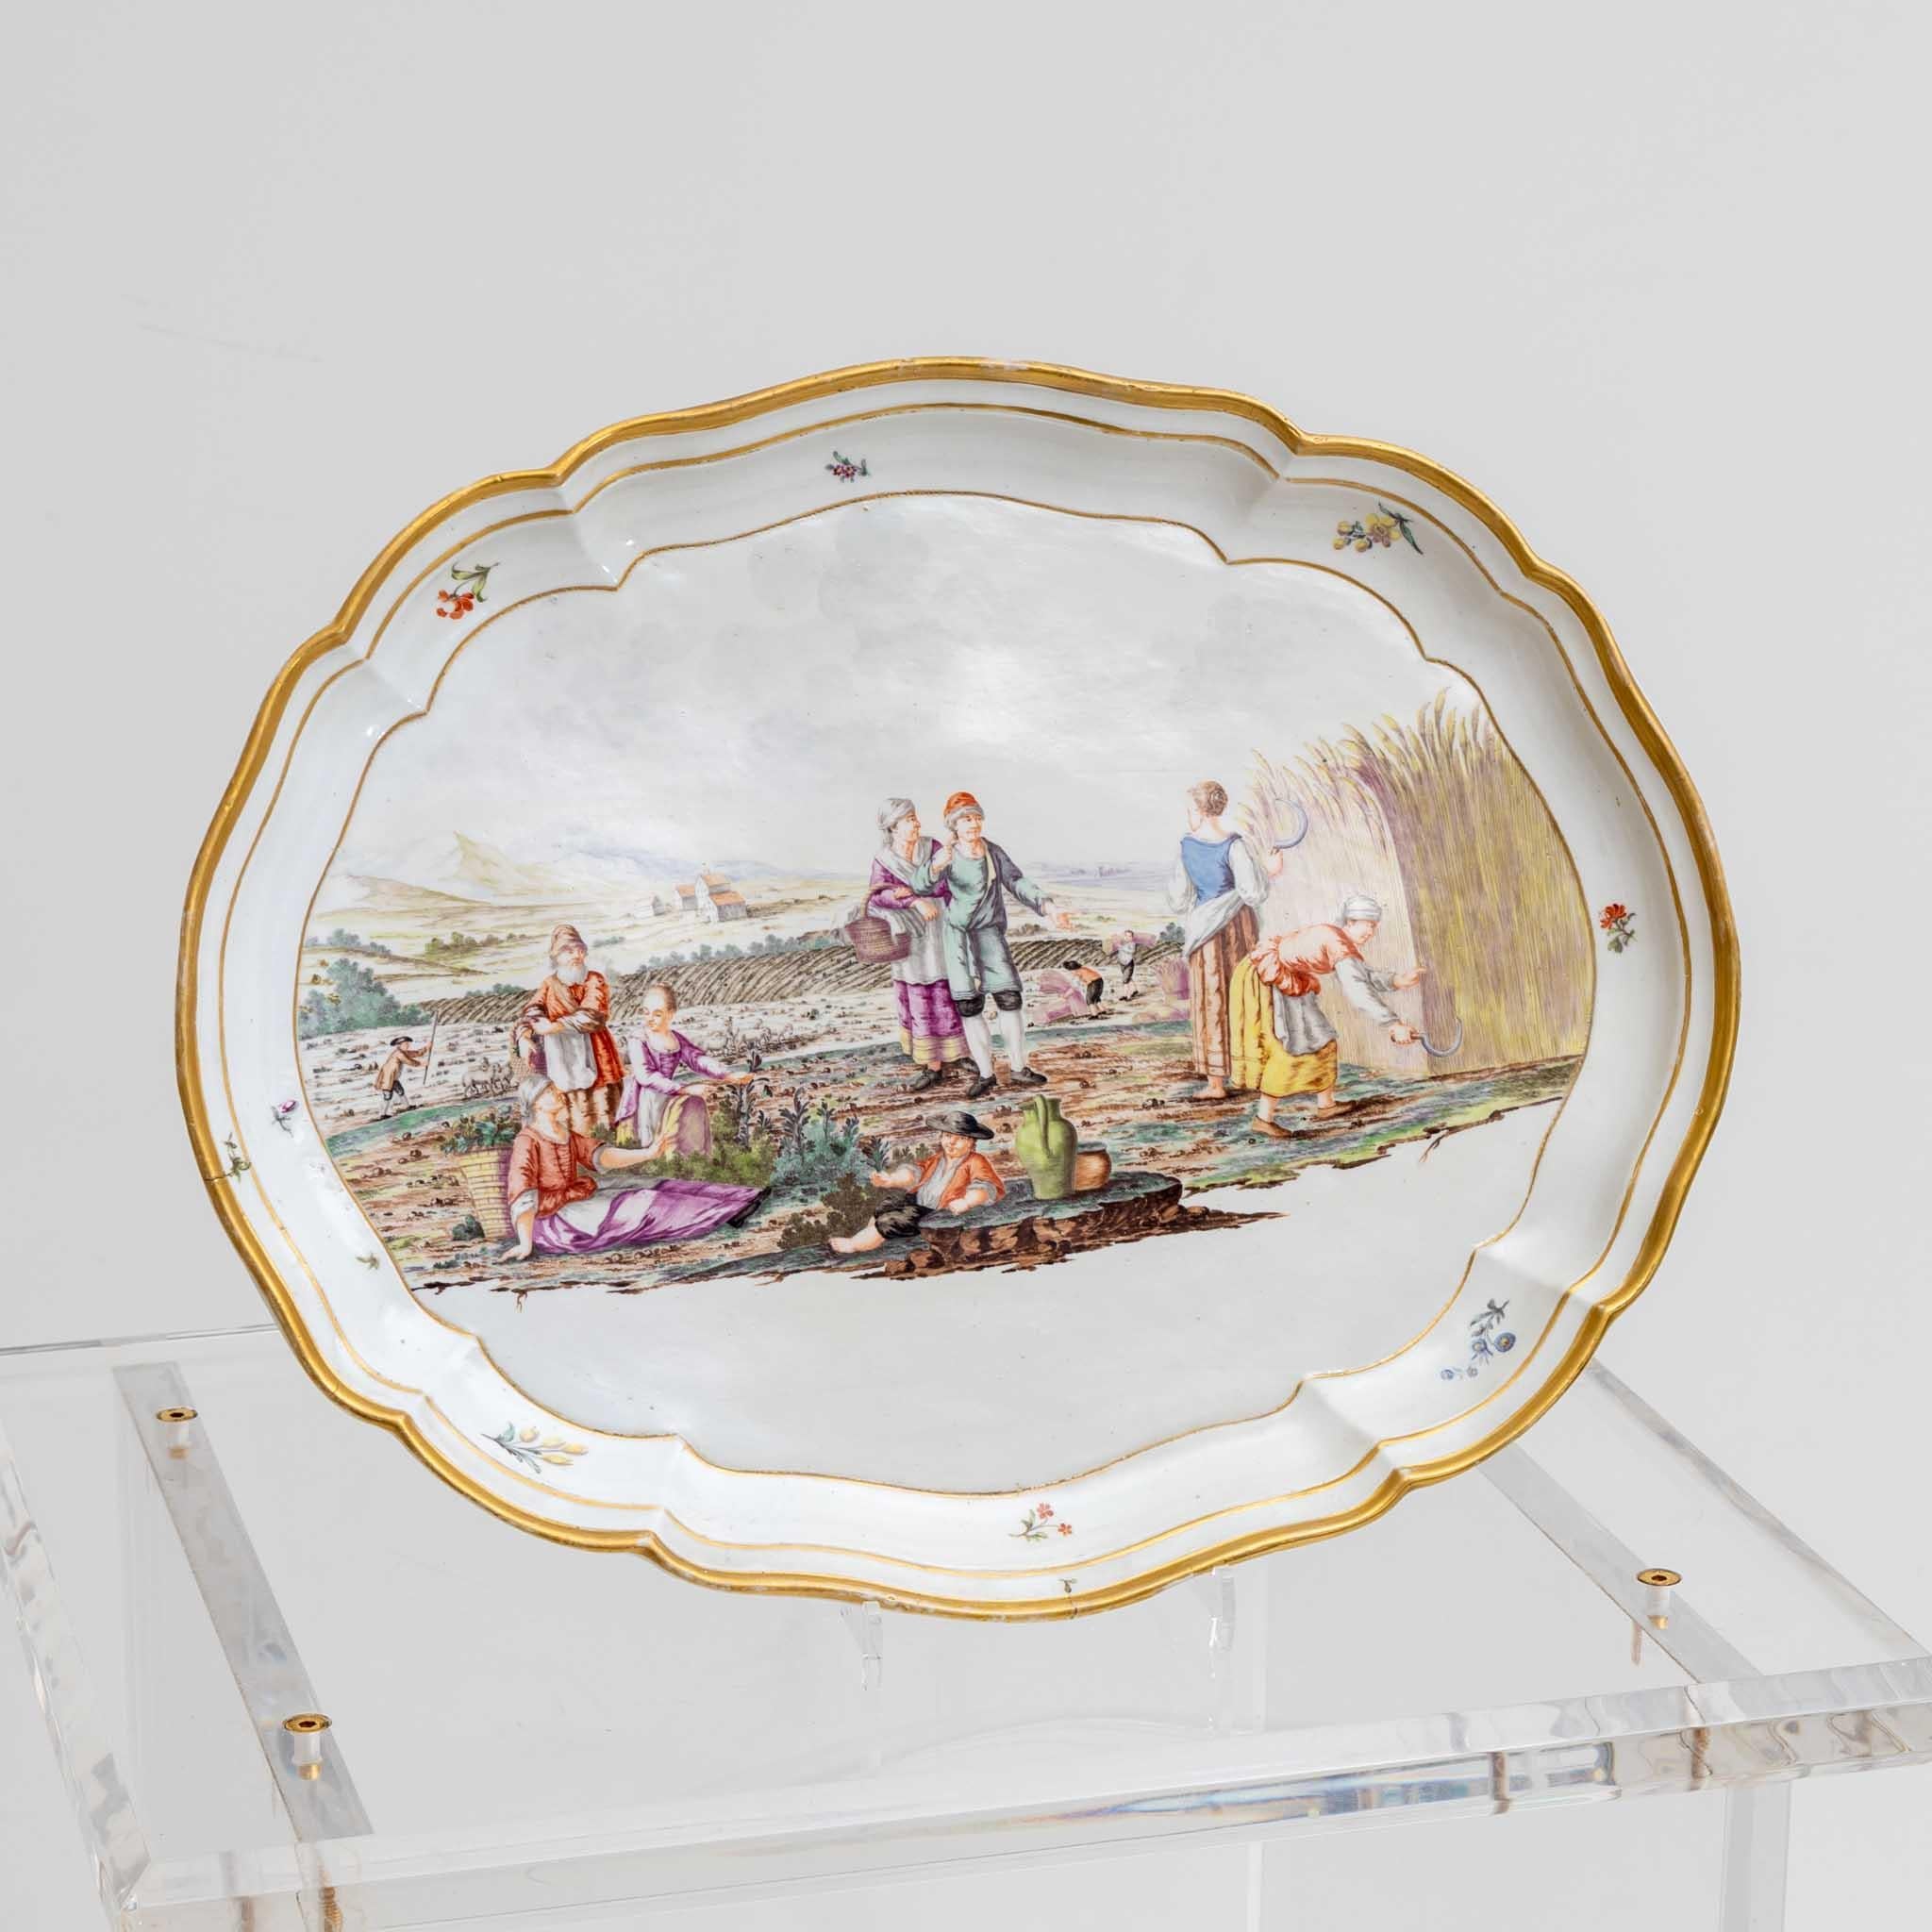 Oval plate with harvest scene, Nymphenburg, c. 1770-75, pressed mark Rautenschild, incised 44, painting attributed to Joseph Kaltner. Prov.: Collection Dr. Paul von Ostermann, Darmstadt-Munich, auctioned Cassirer/Helbing 1928, Lot 624; G. Röbbig,